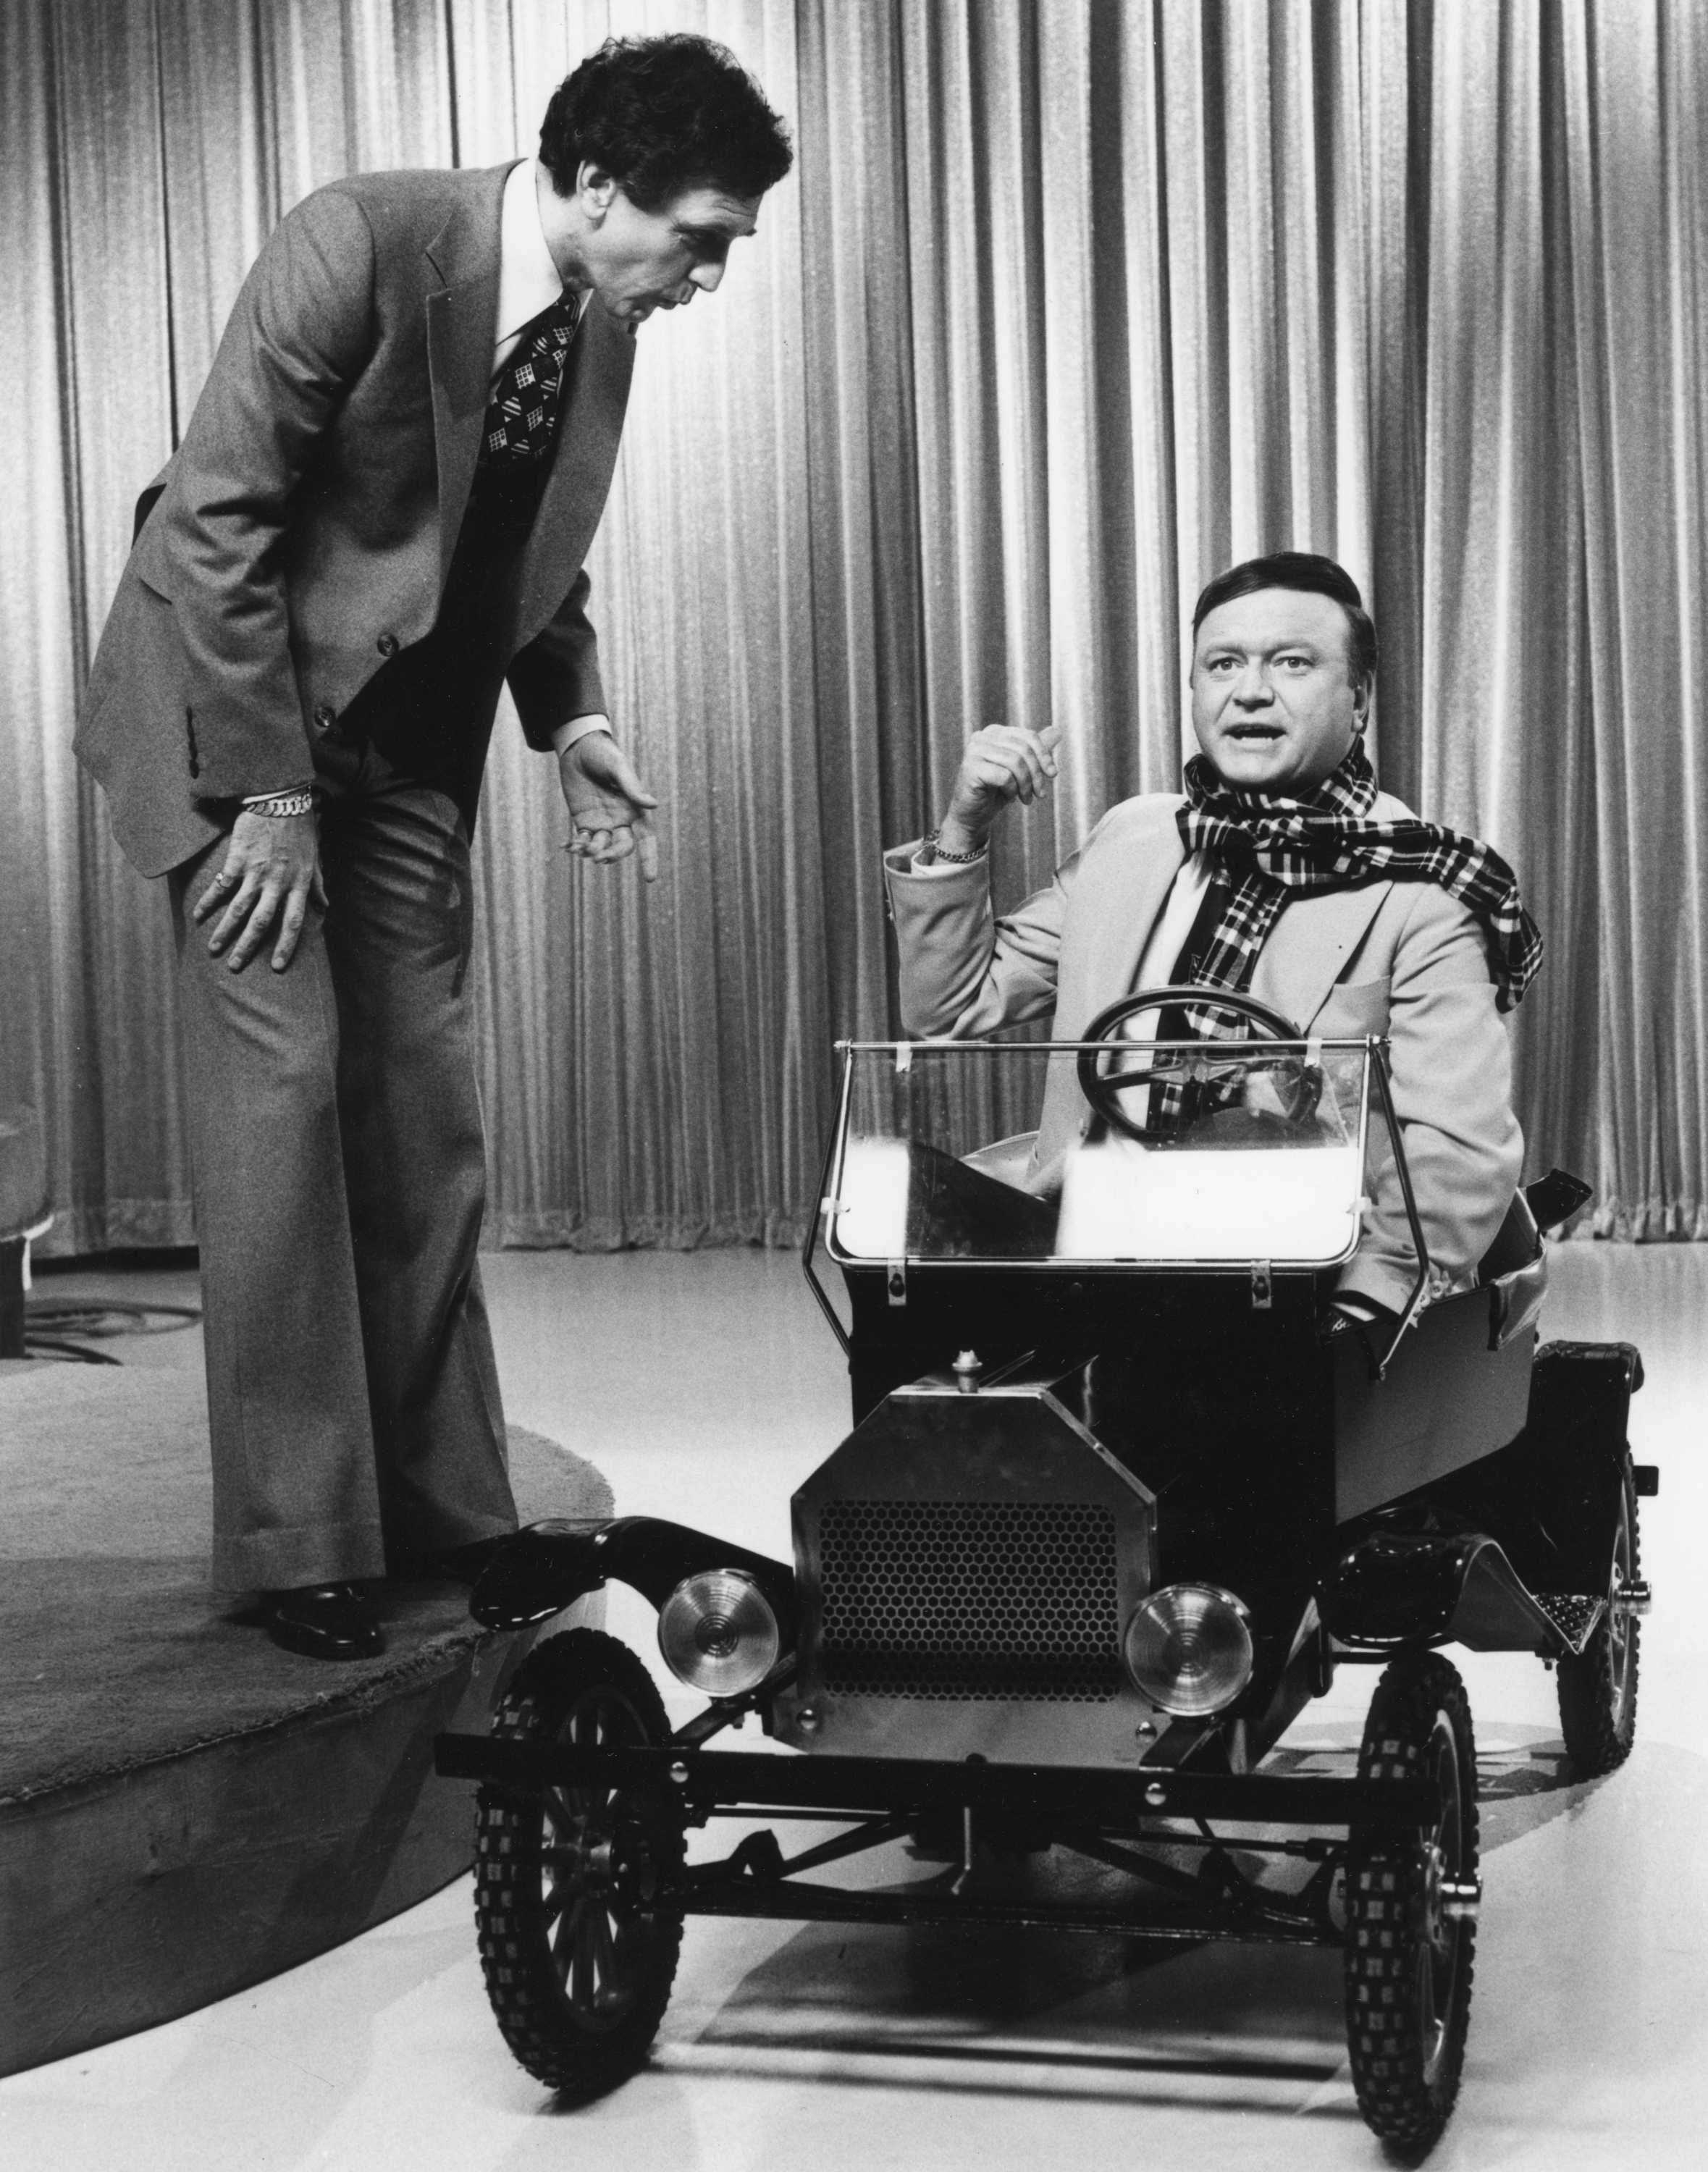 A black and white photo of Don Lane looking down at Bert Newton, who is driving a mini Ford car in a TV studio.